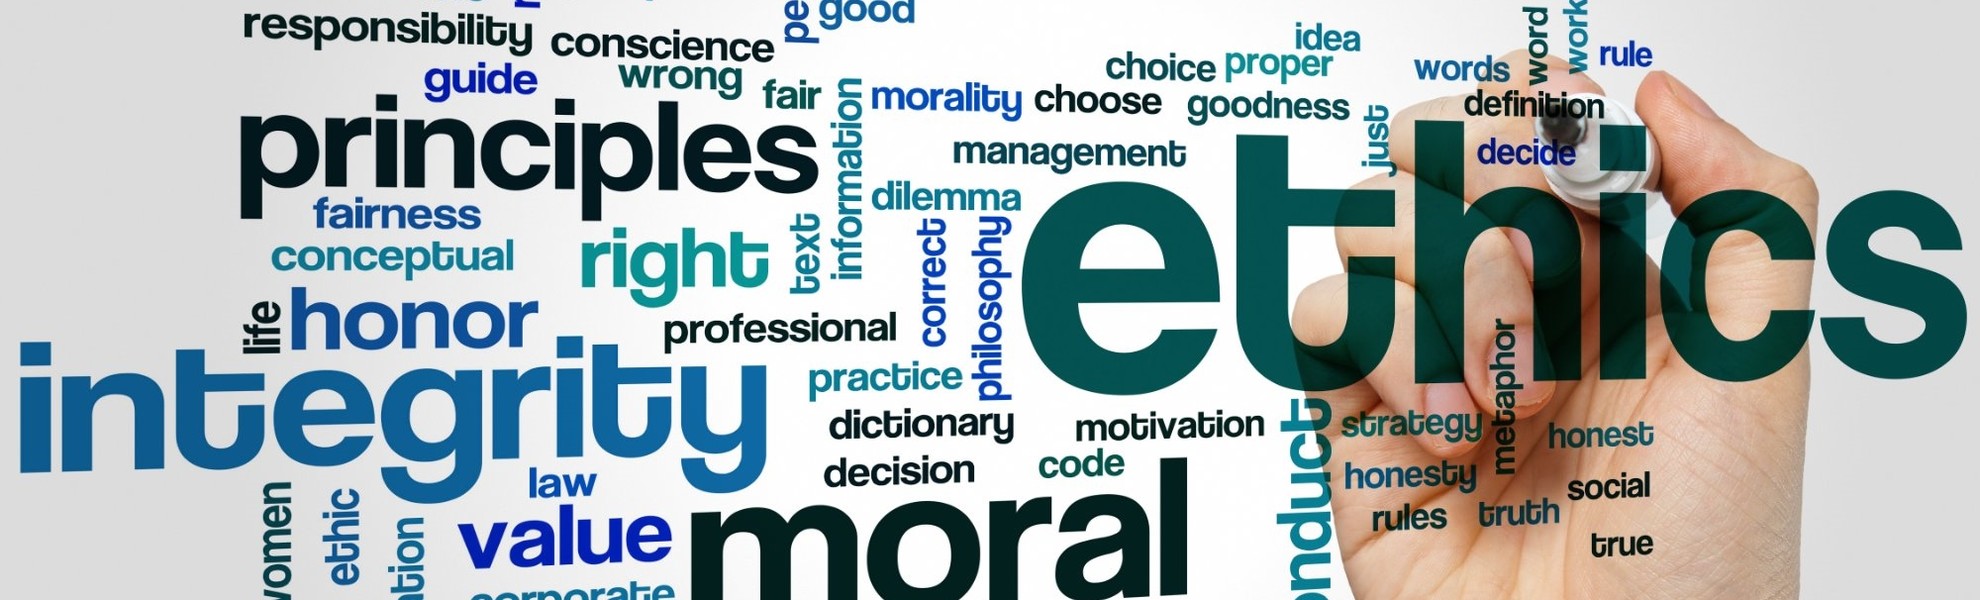 define personal code of ethics